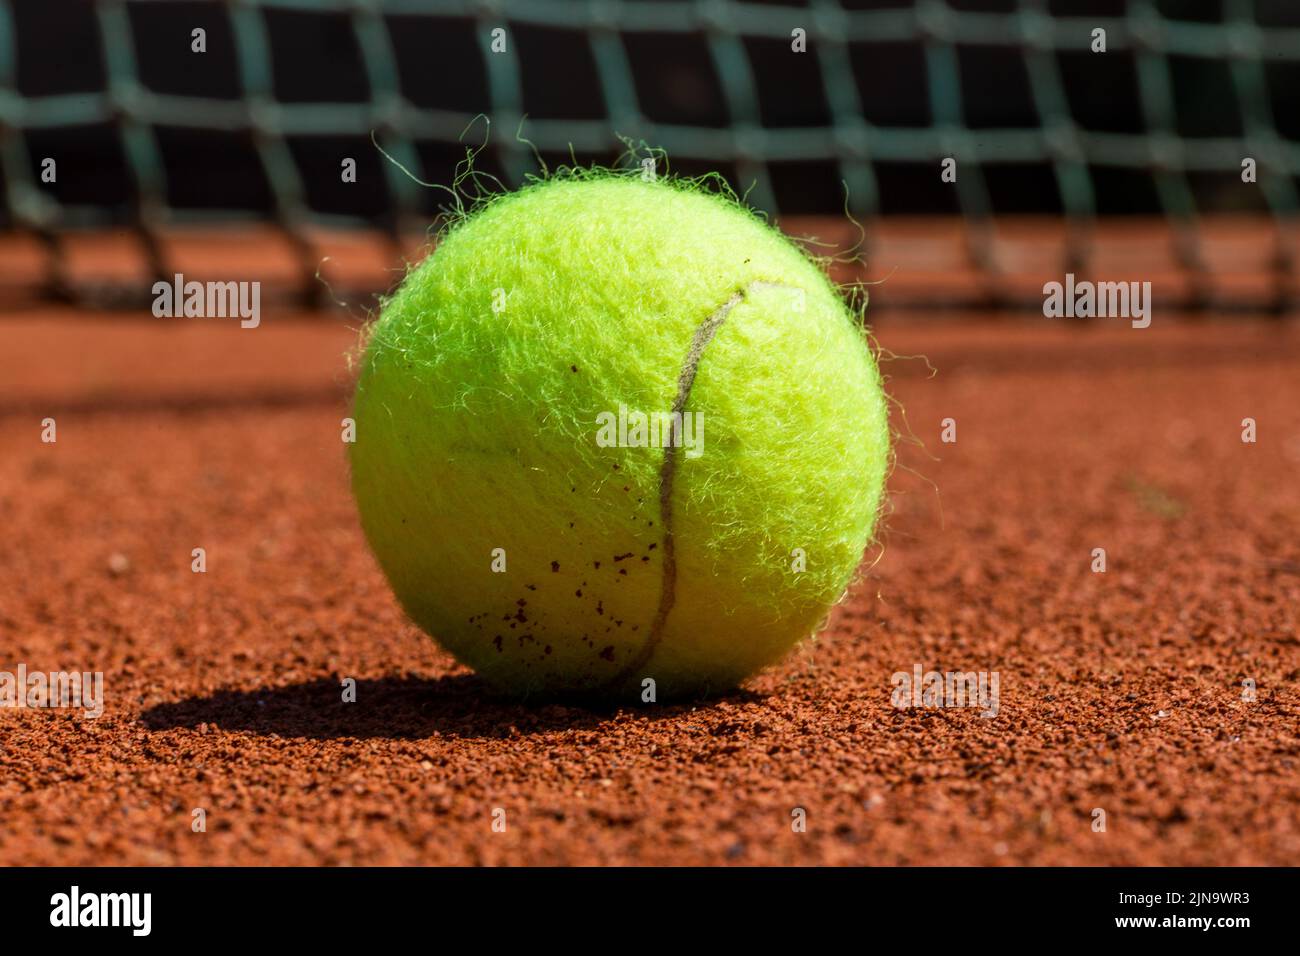 Symbol image tennis: Close-up of a tennis ball on a clay court Stock Photo